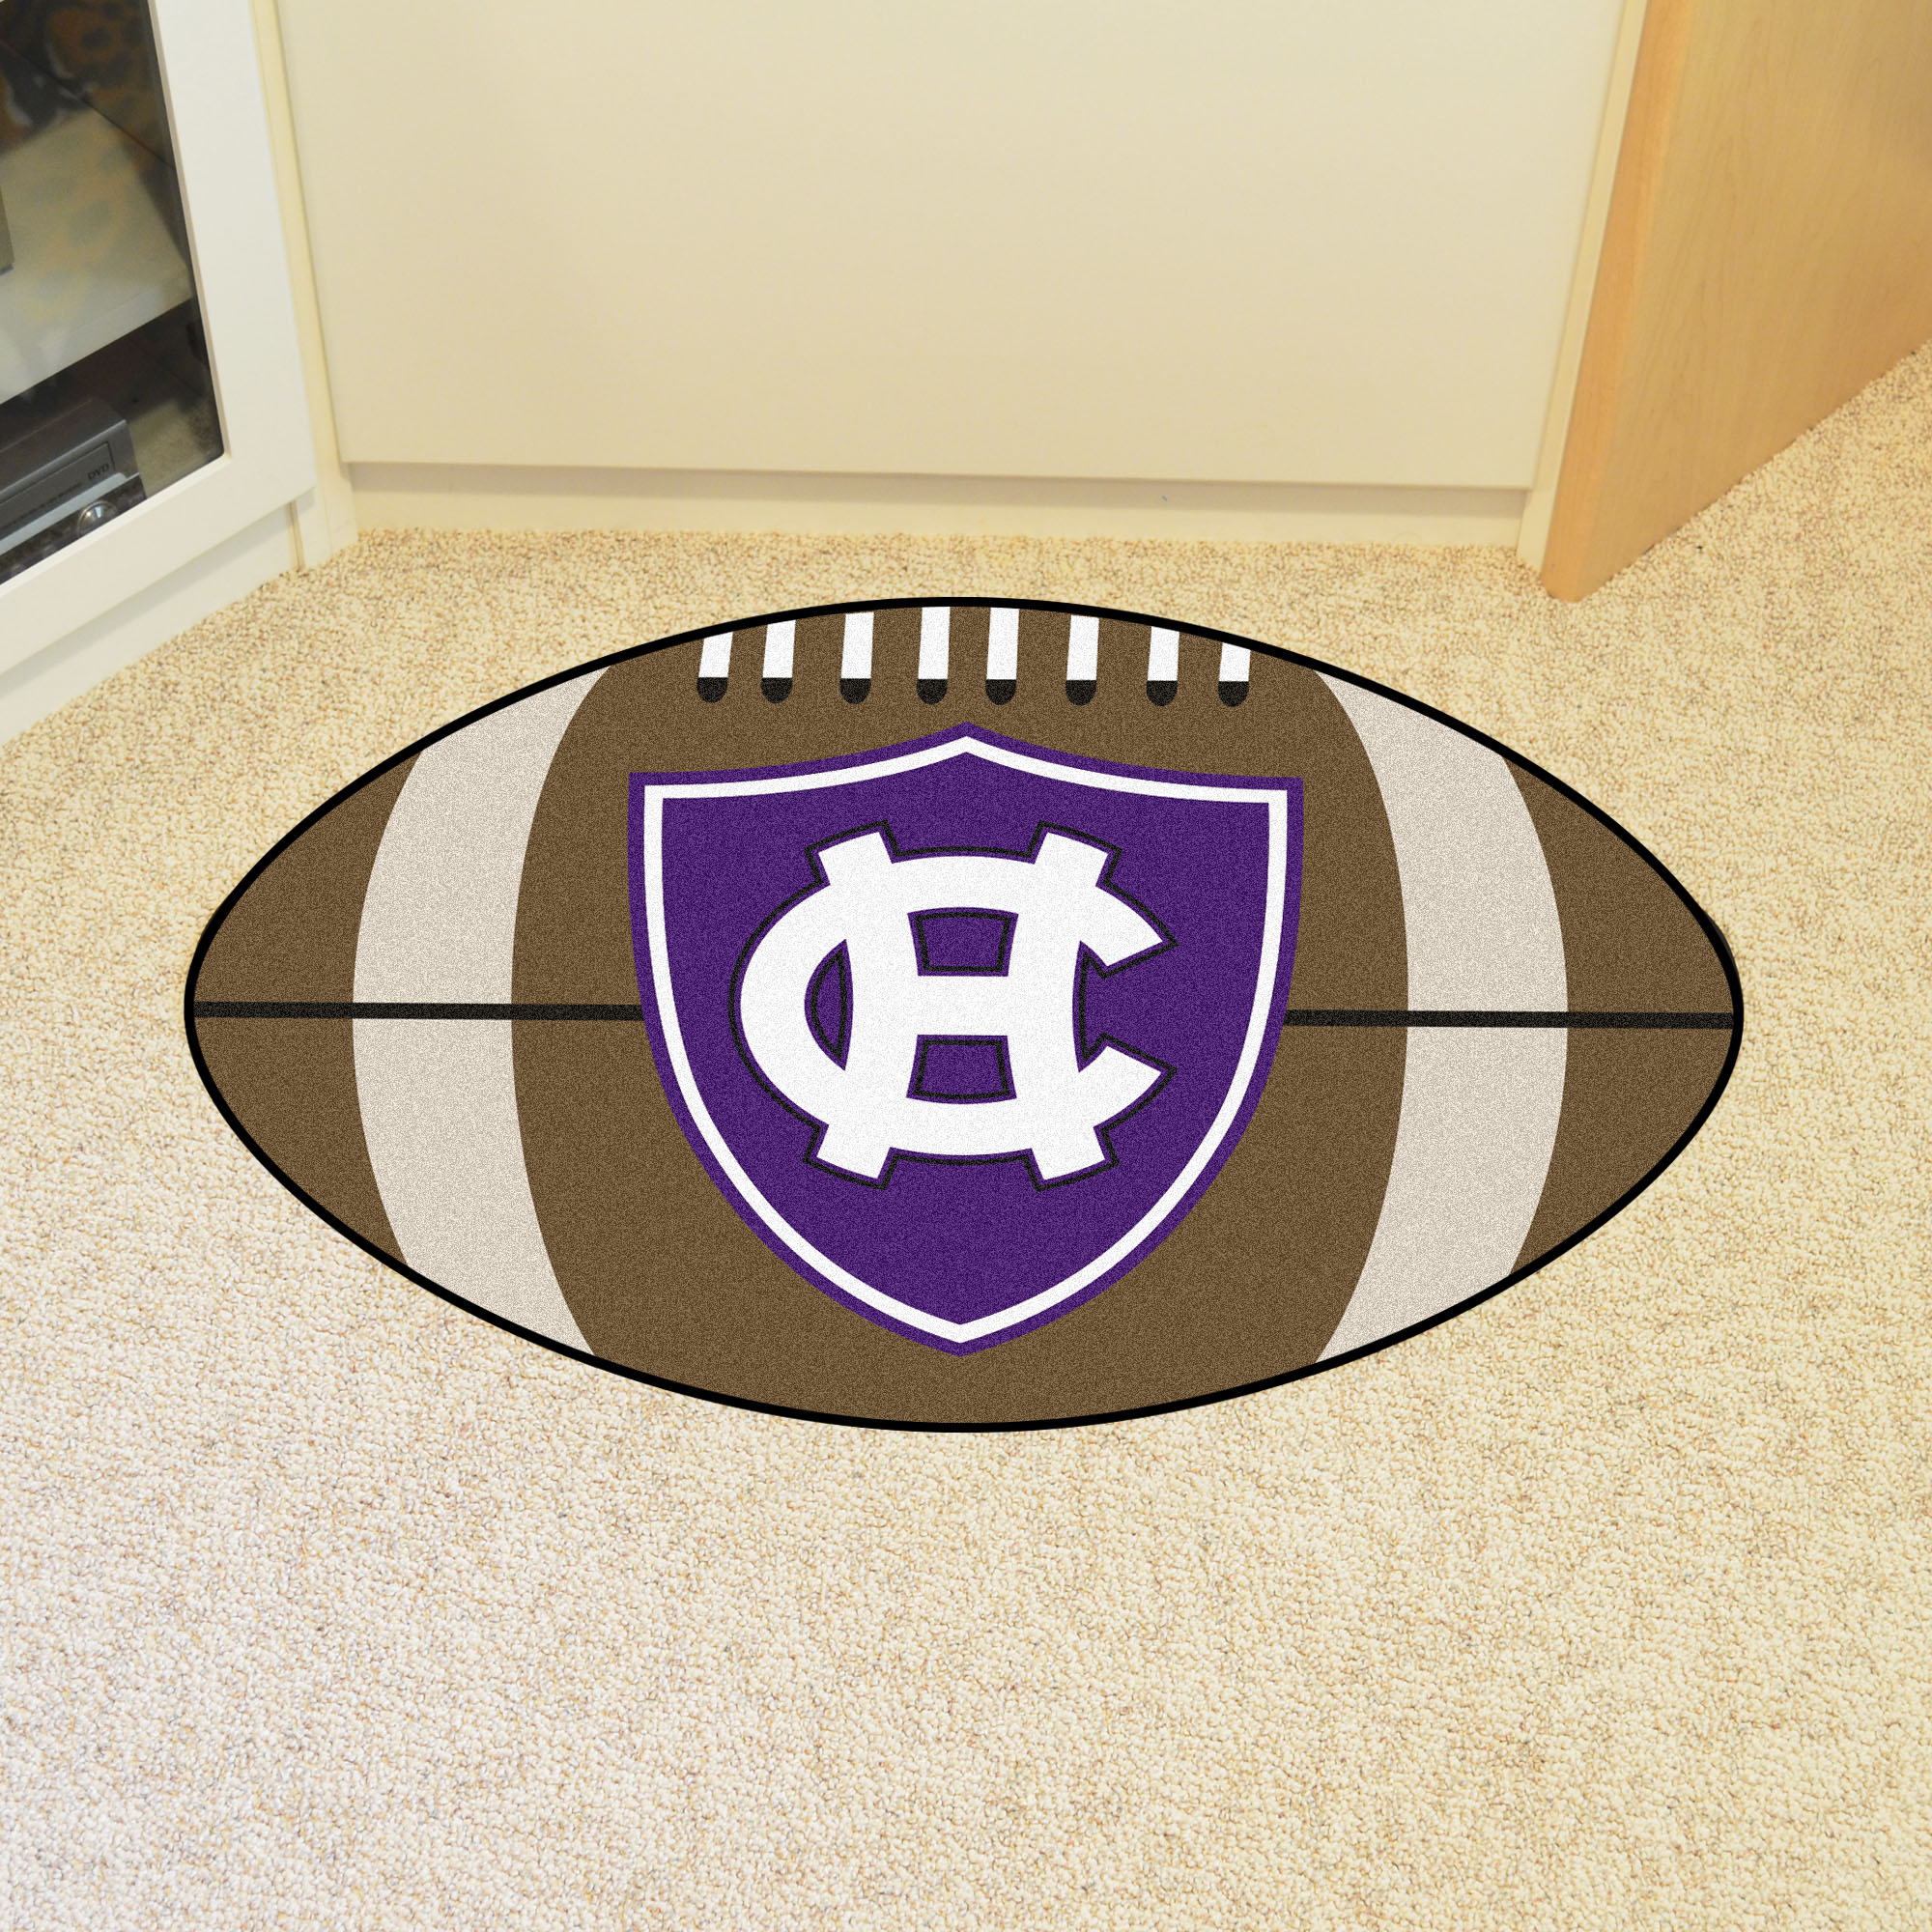 College of the Holy Cross Ball-Shaped Area Rugs (Ball Shaped Area Rugs: Football)